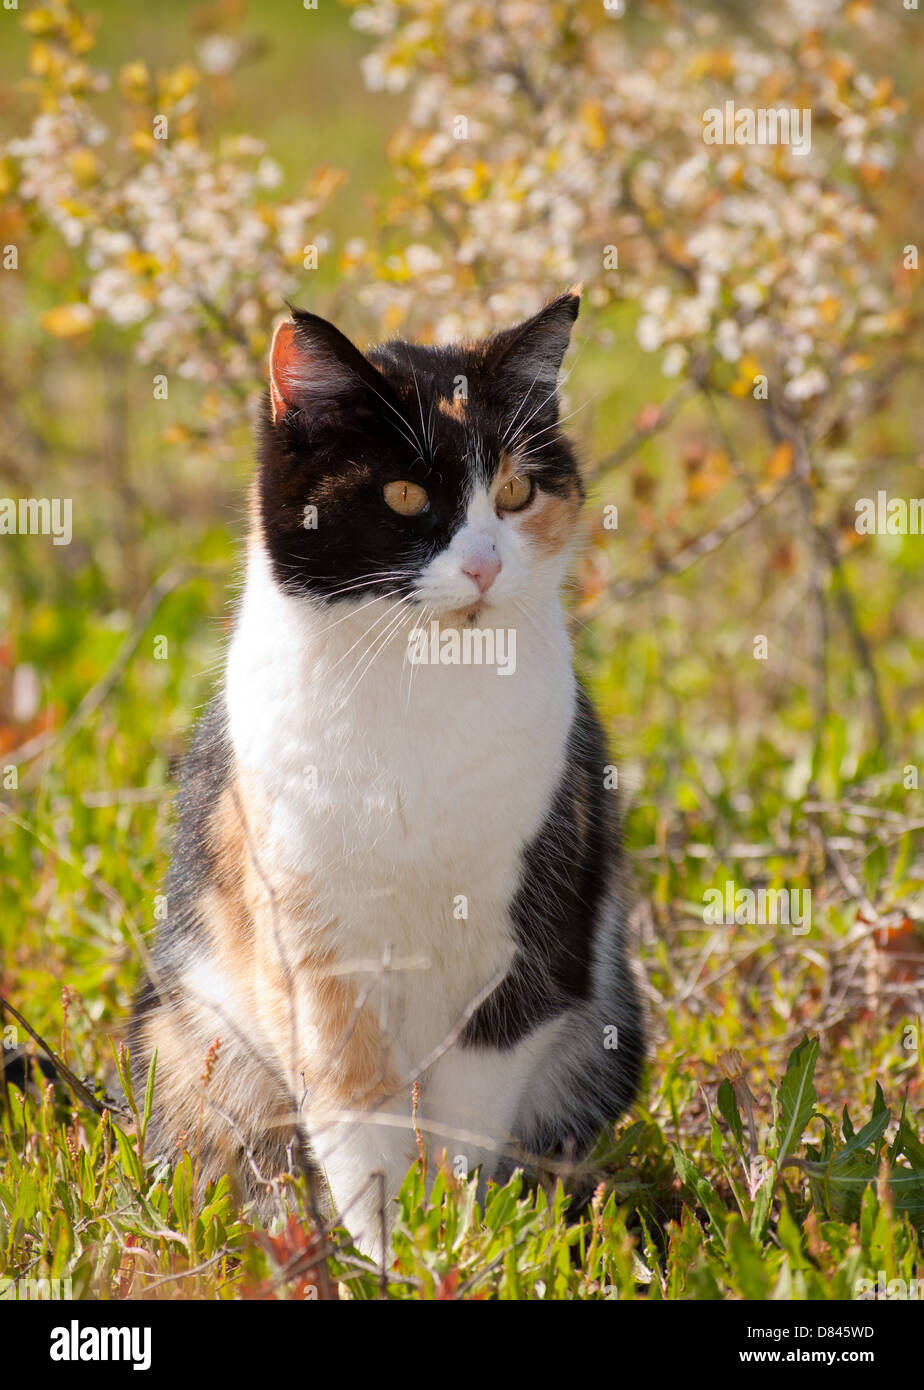 Calico cat in sun with spring flowers Stock Photo